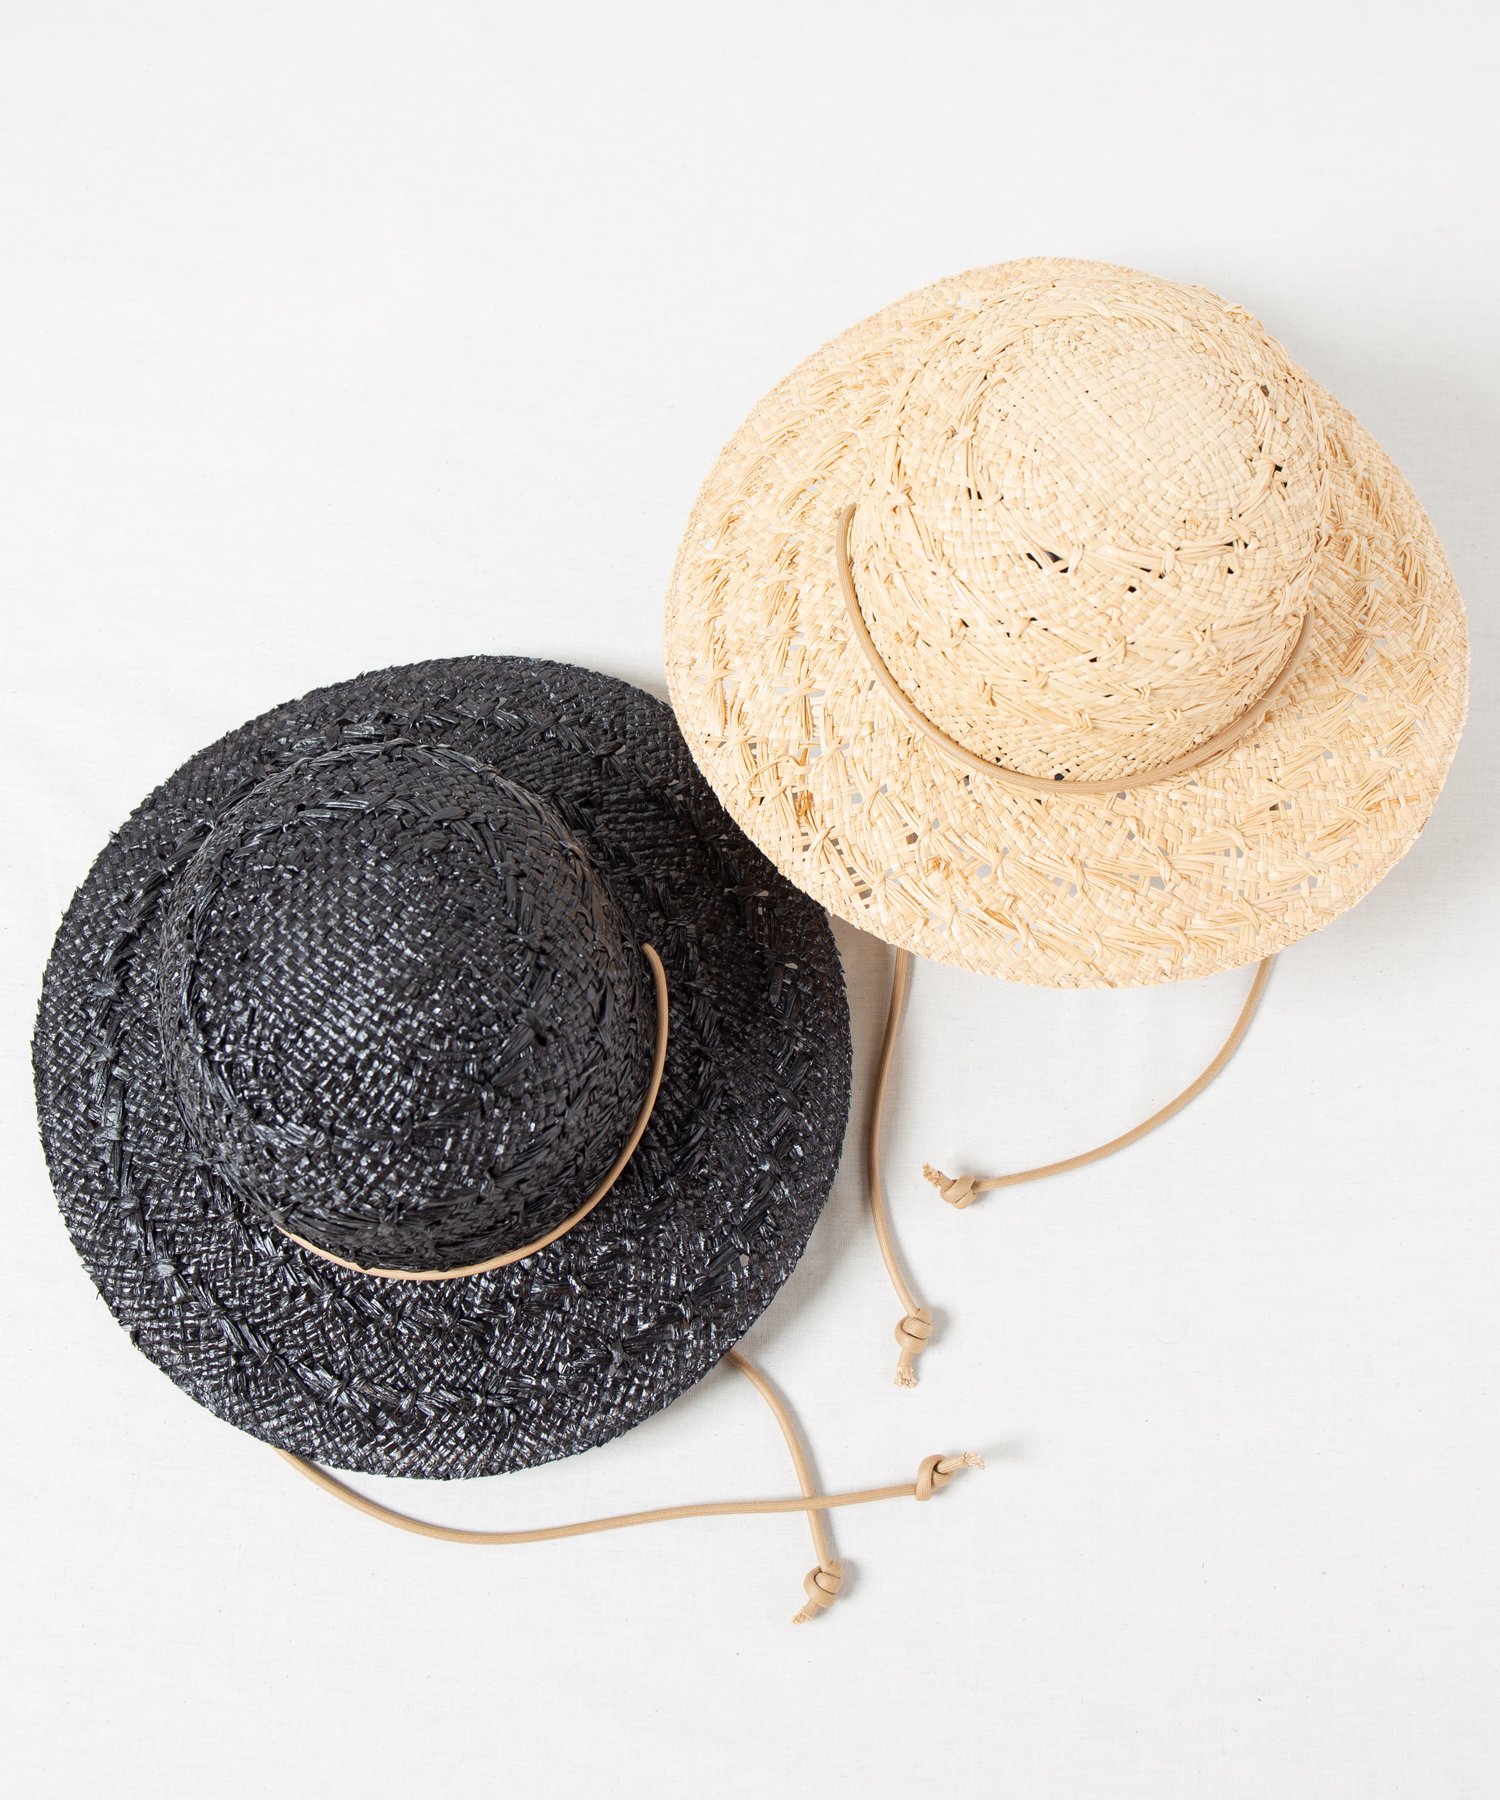 <img class='new_mark_img1' src='https://img.shop-pro.jp/img/new/icons15.gif' style='border:none;display:inline;margin:0px;padding:0px;width:auto;' />【Racal】 Patterned Raffia Hat / レイズストア限定 柄編みラフィアハット